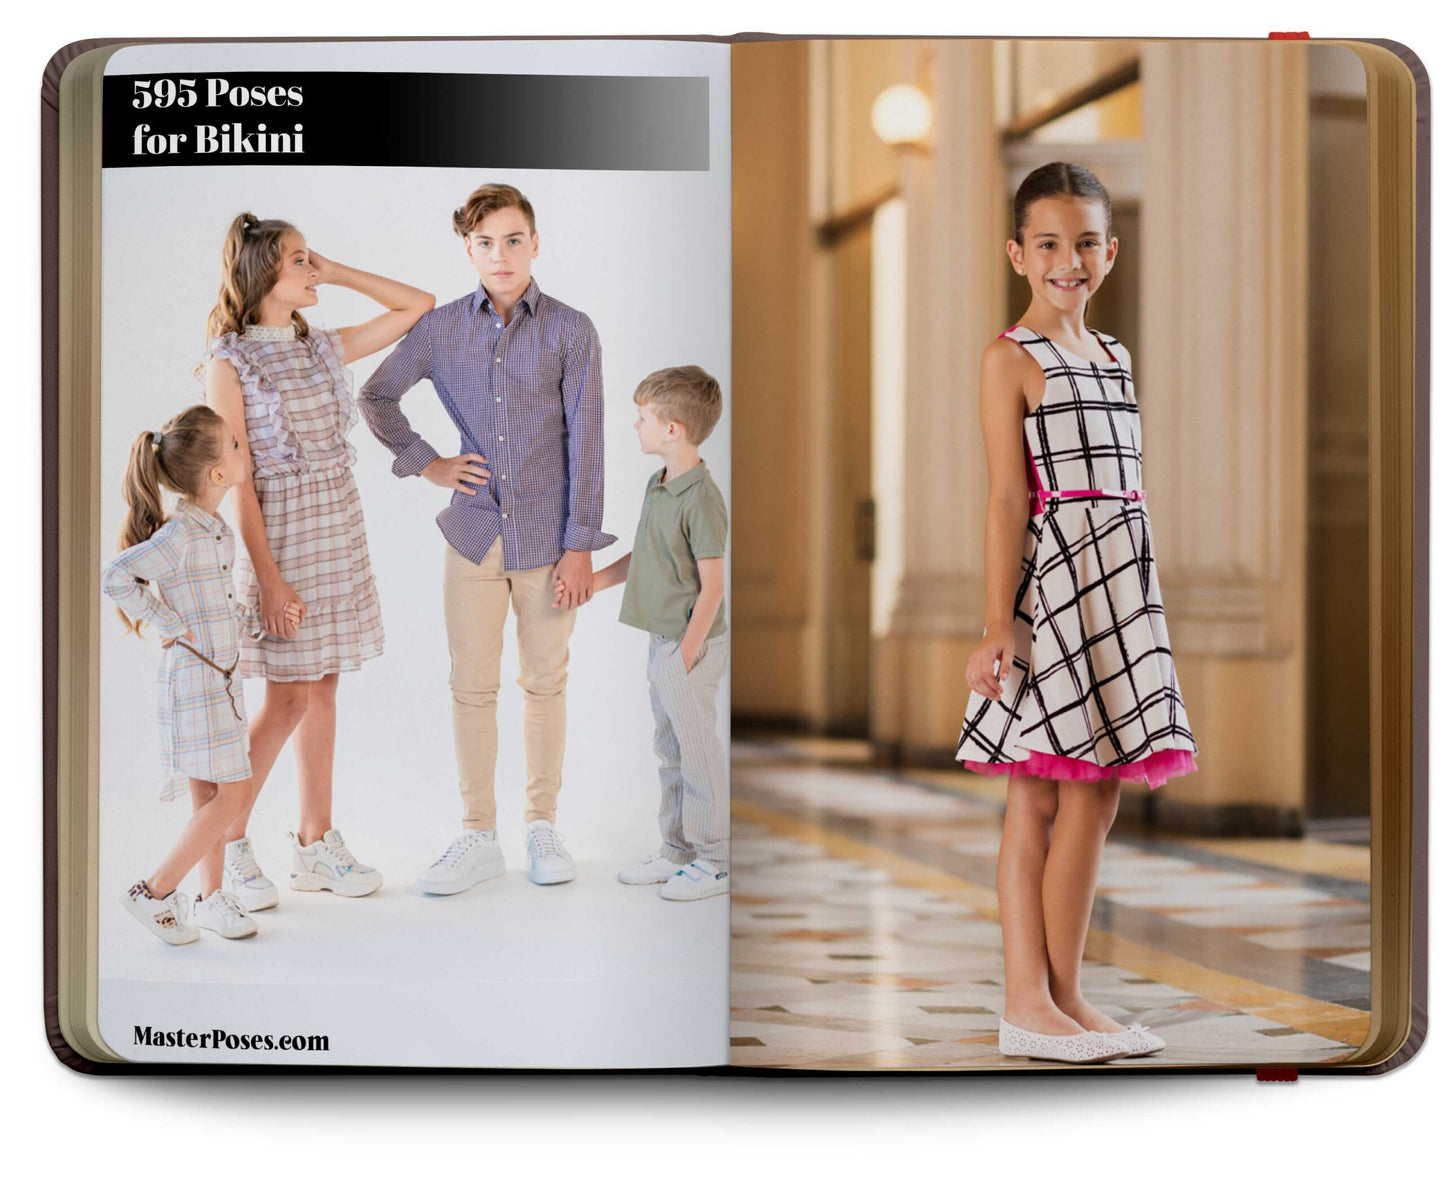 The 550 Best Poses for Teenager & Child- Digital Book